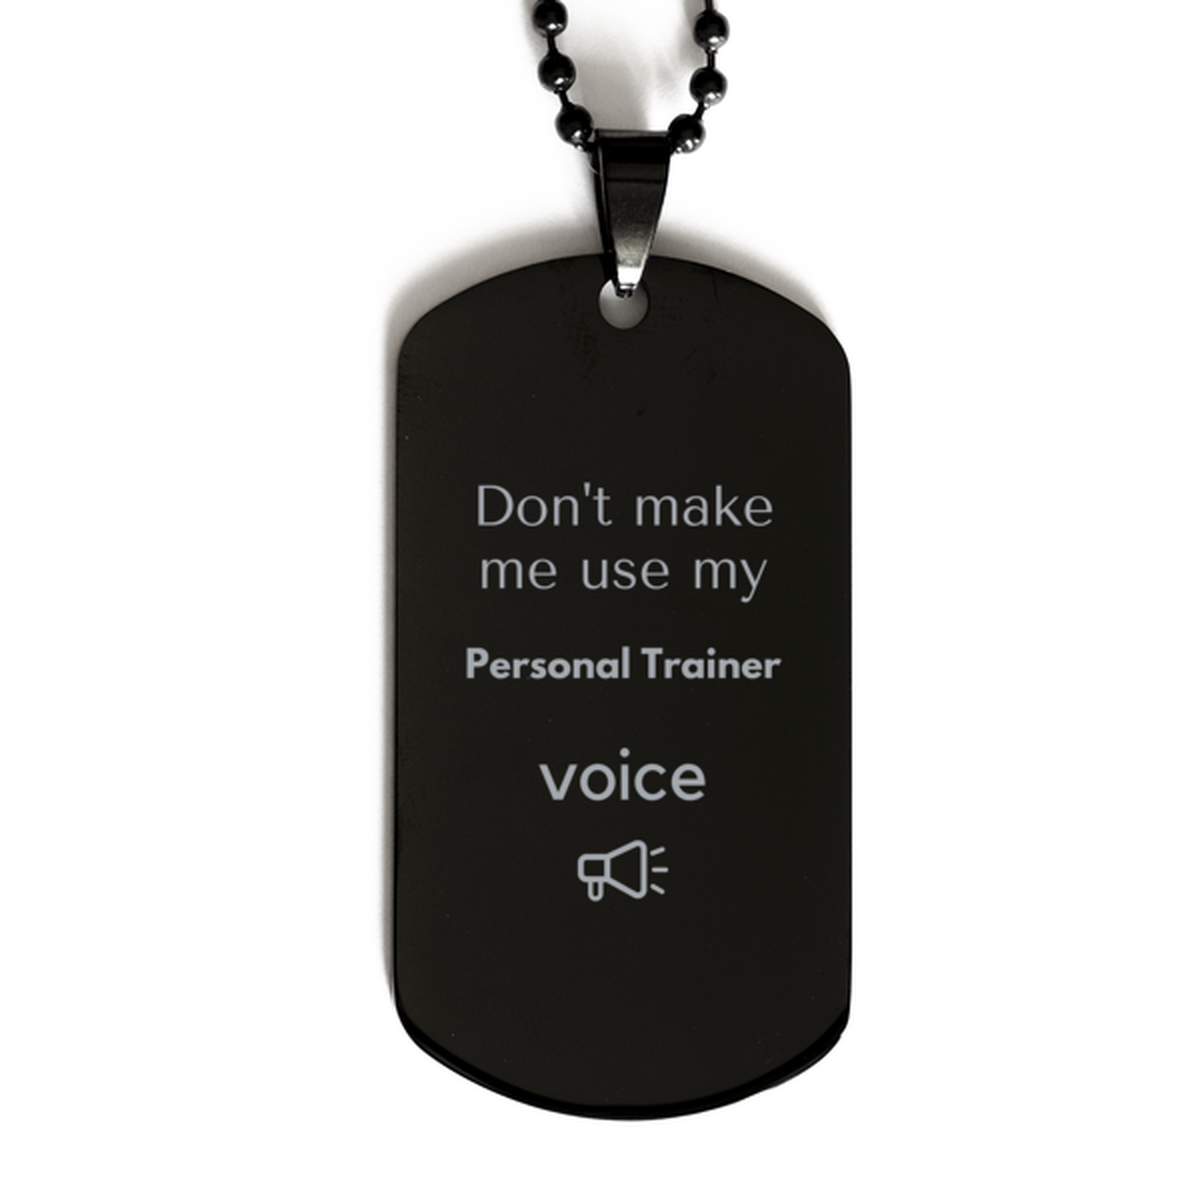 Don't make me use my Personal Trainer voice, Sarcasm Personal Trainer Gifts, Christmas Personal Trainer Black Dog Tag Birthday Unique Gifts For Personal Trainer Coworkers, Men, Women, Colleague, Friends